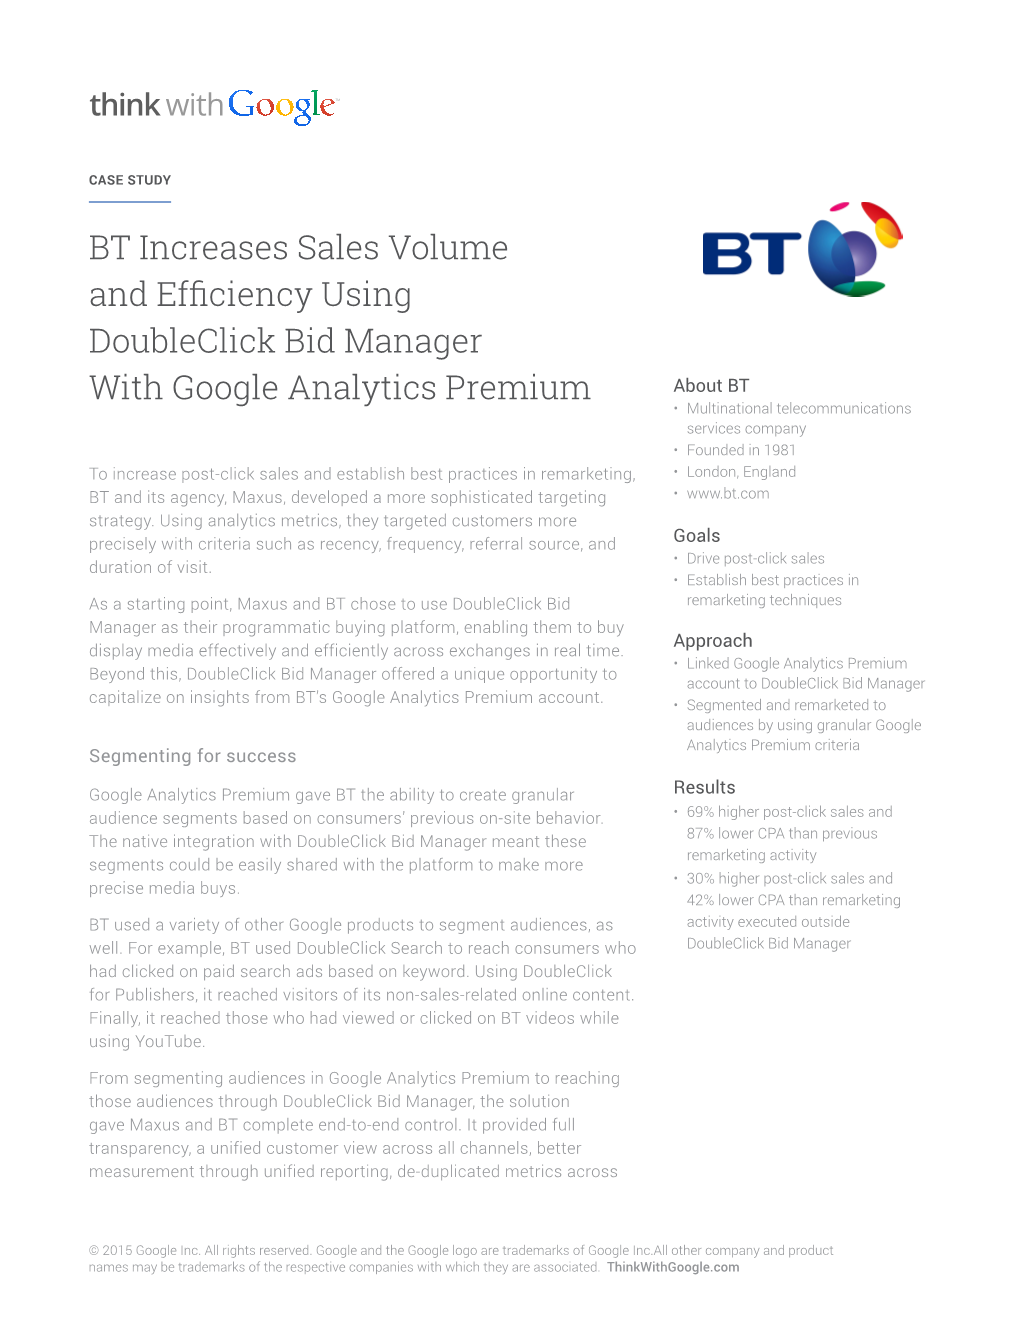 BT Increases Sales Volume and Efficiency Using Doubleclick Bid